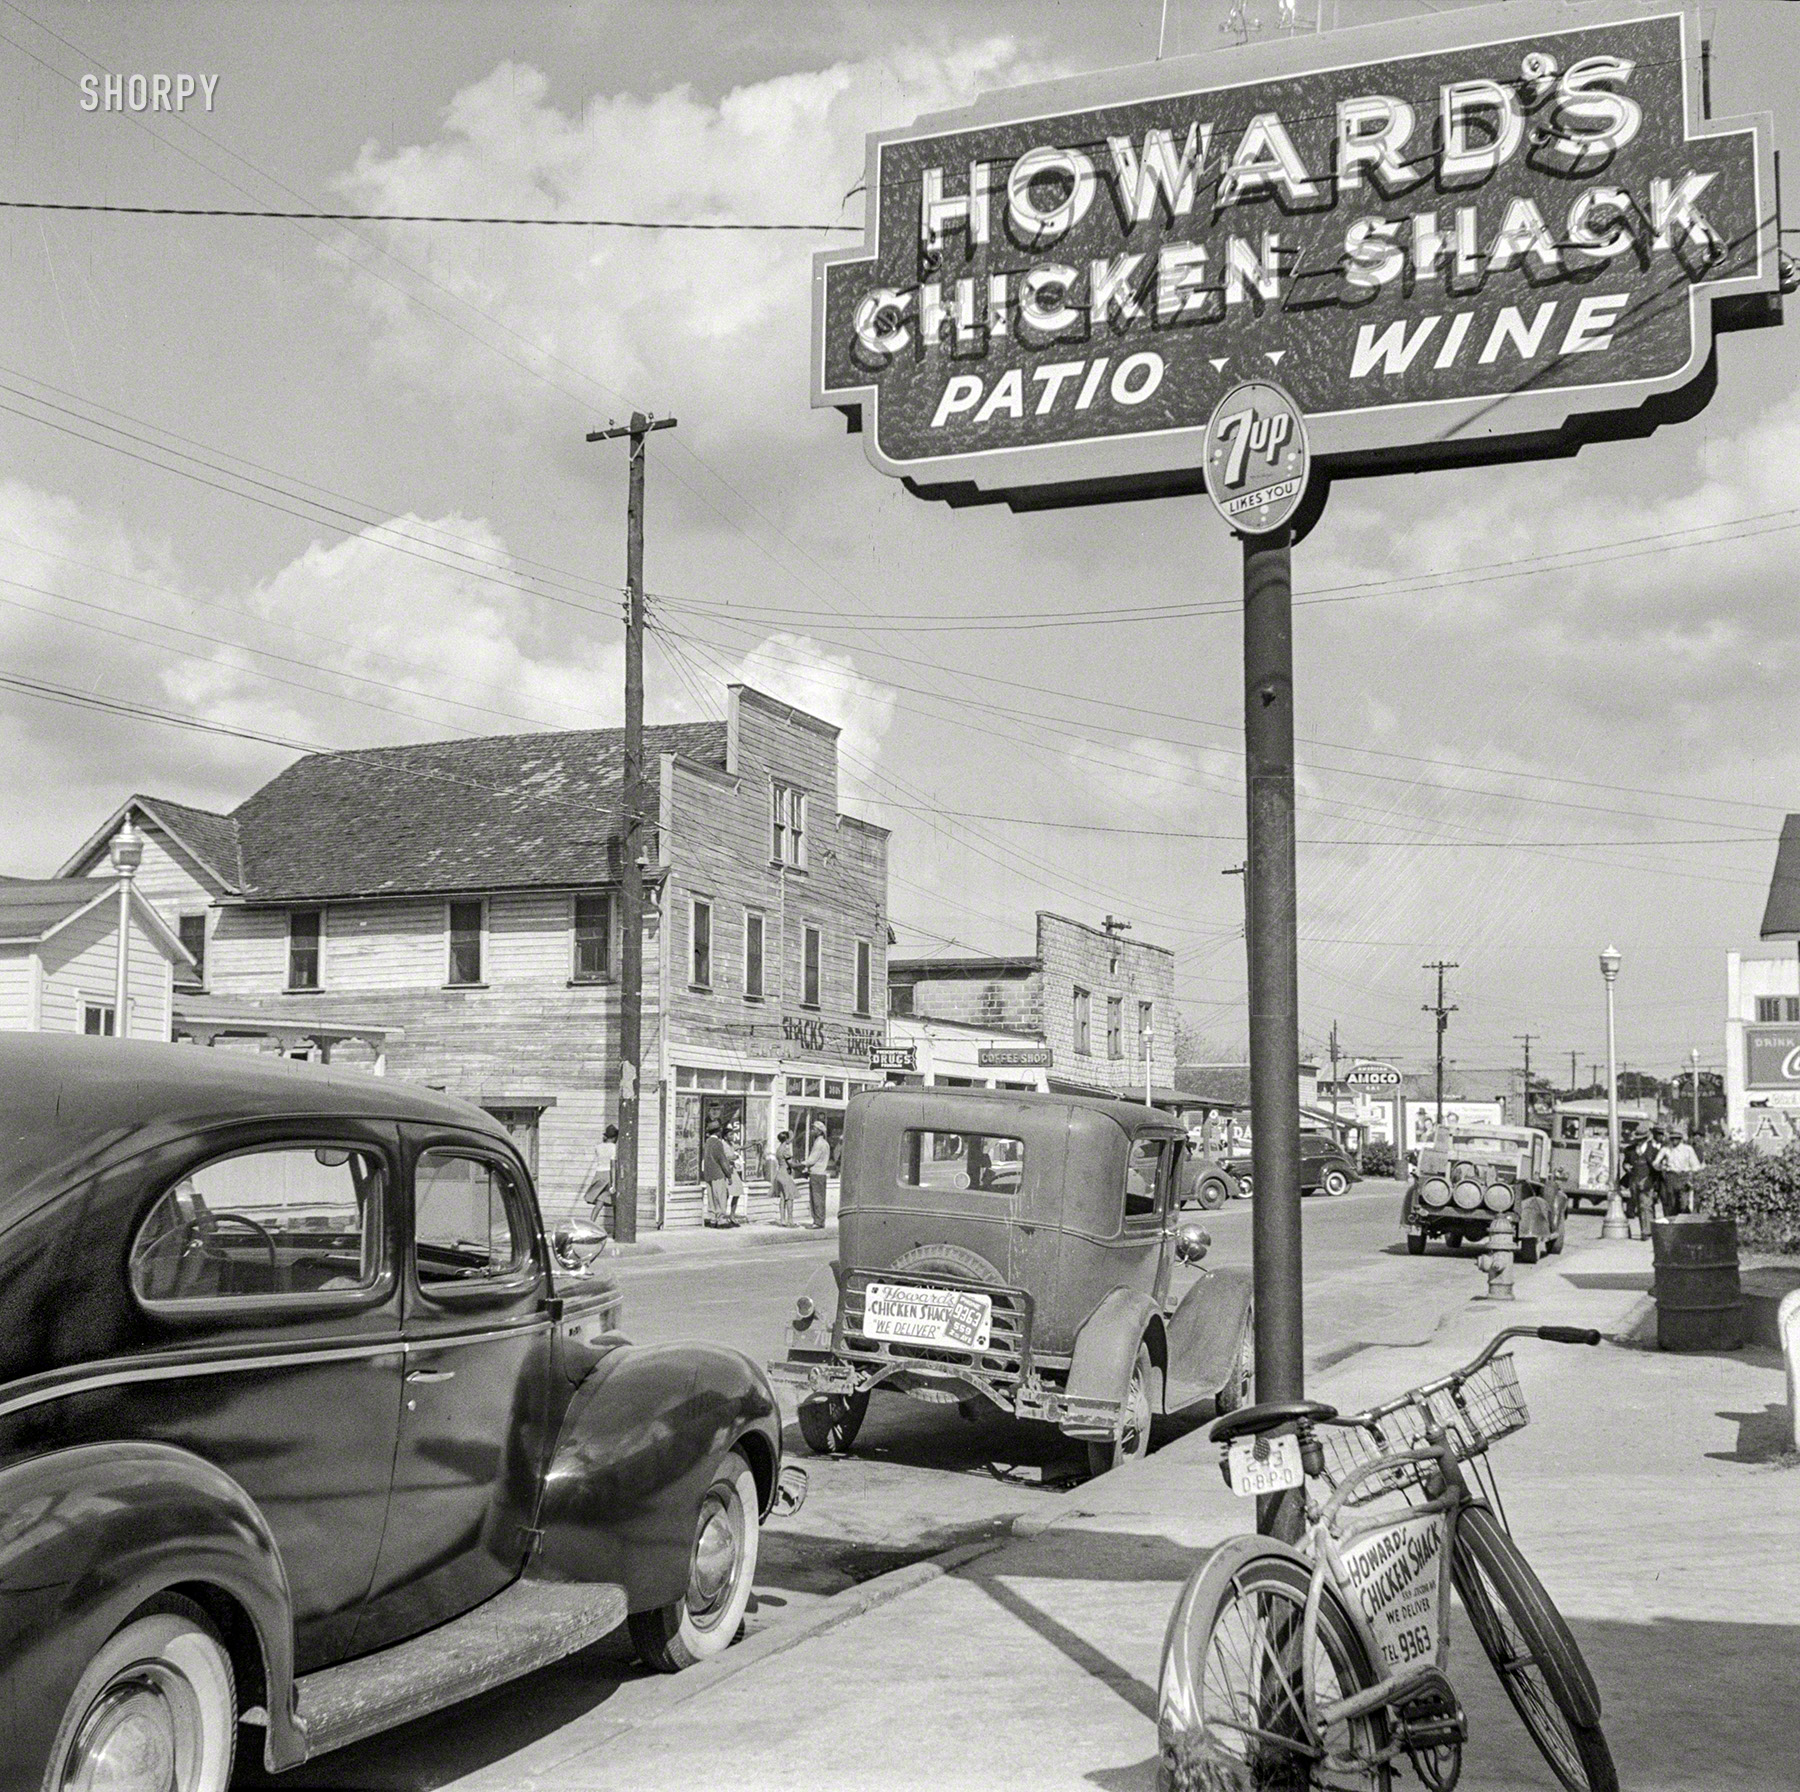 February 1943. "Daytona Beach, Florida. Street scene." Howard's Chicken Shack -- we're going to phone 9363 and see if they can deliver to 2016. Medium format negative by Gordon Parks for the Office of War Information. View full size.